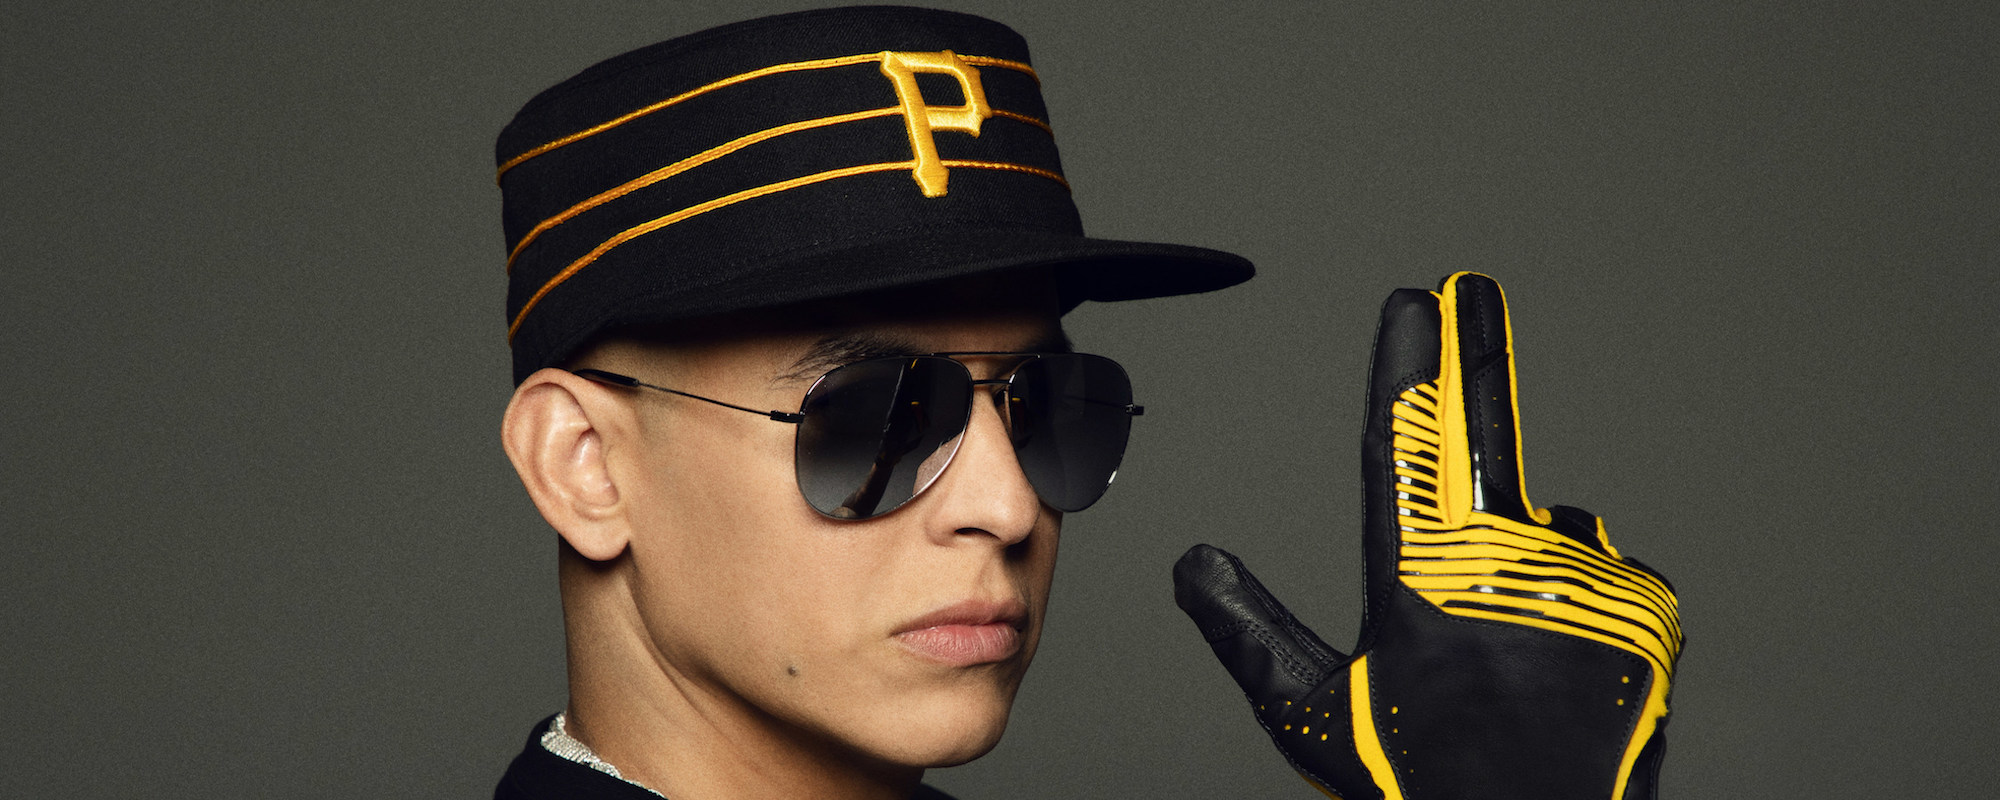 Daddy Yankee shares a sweet photo with an important message